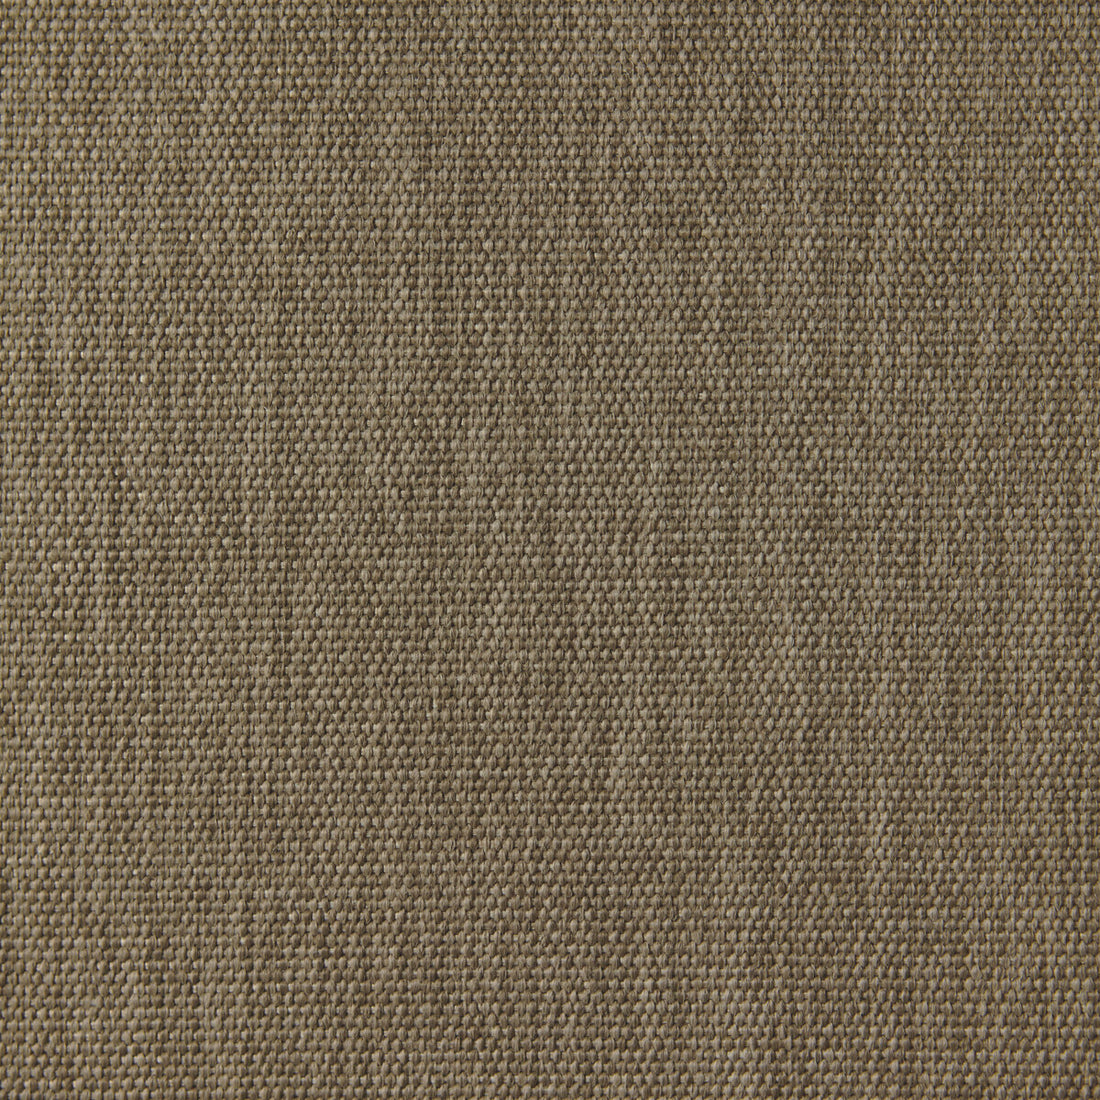 Blanes fabric in 1 color - pattern LZ-30398.01.0 - by Kravet Design in the Lizzo Indoor/Outdoor collection